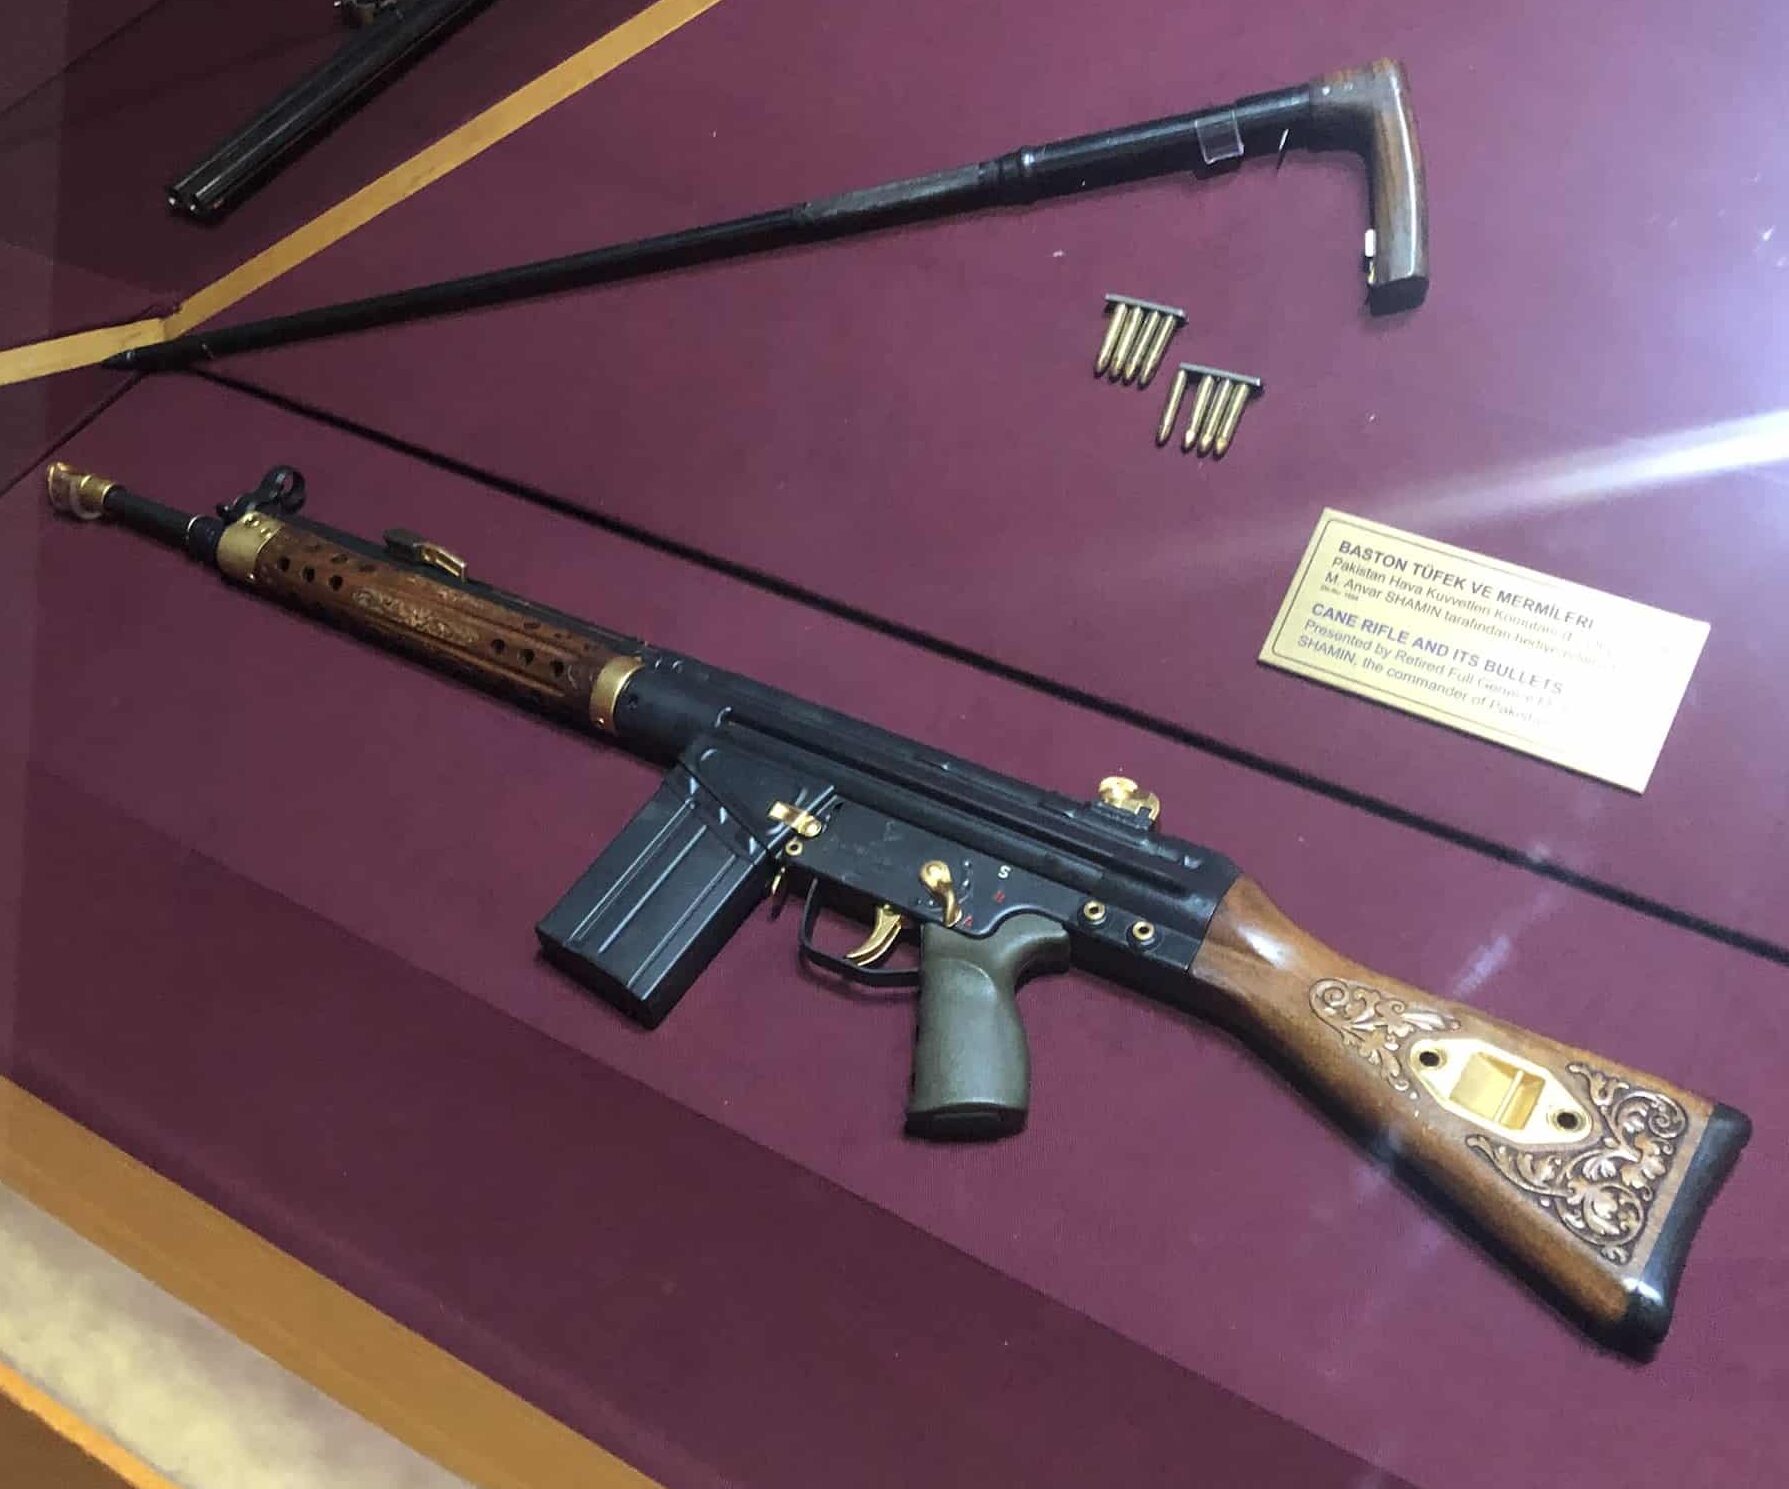 Cane rifle from Pakistan